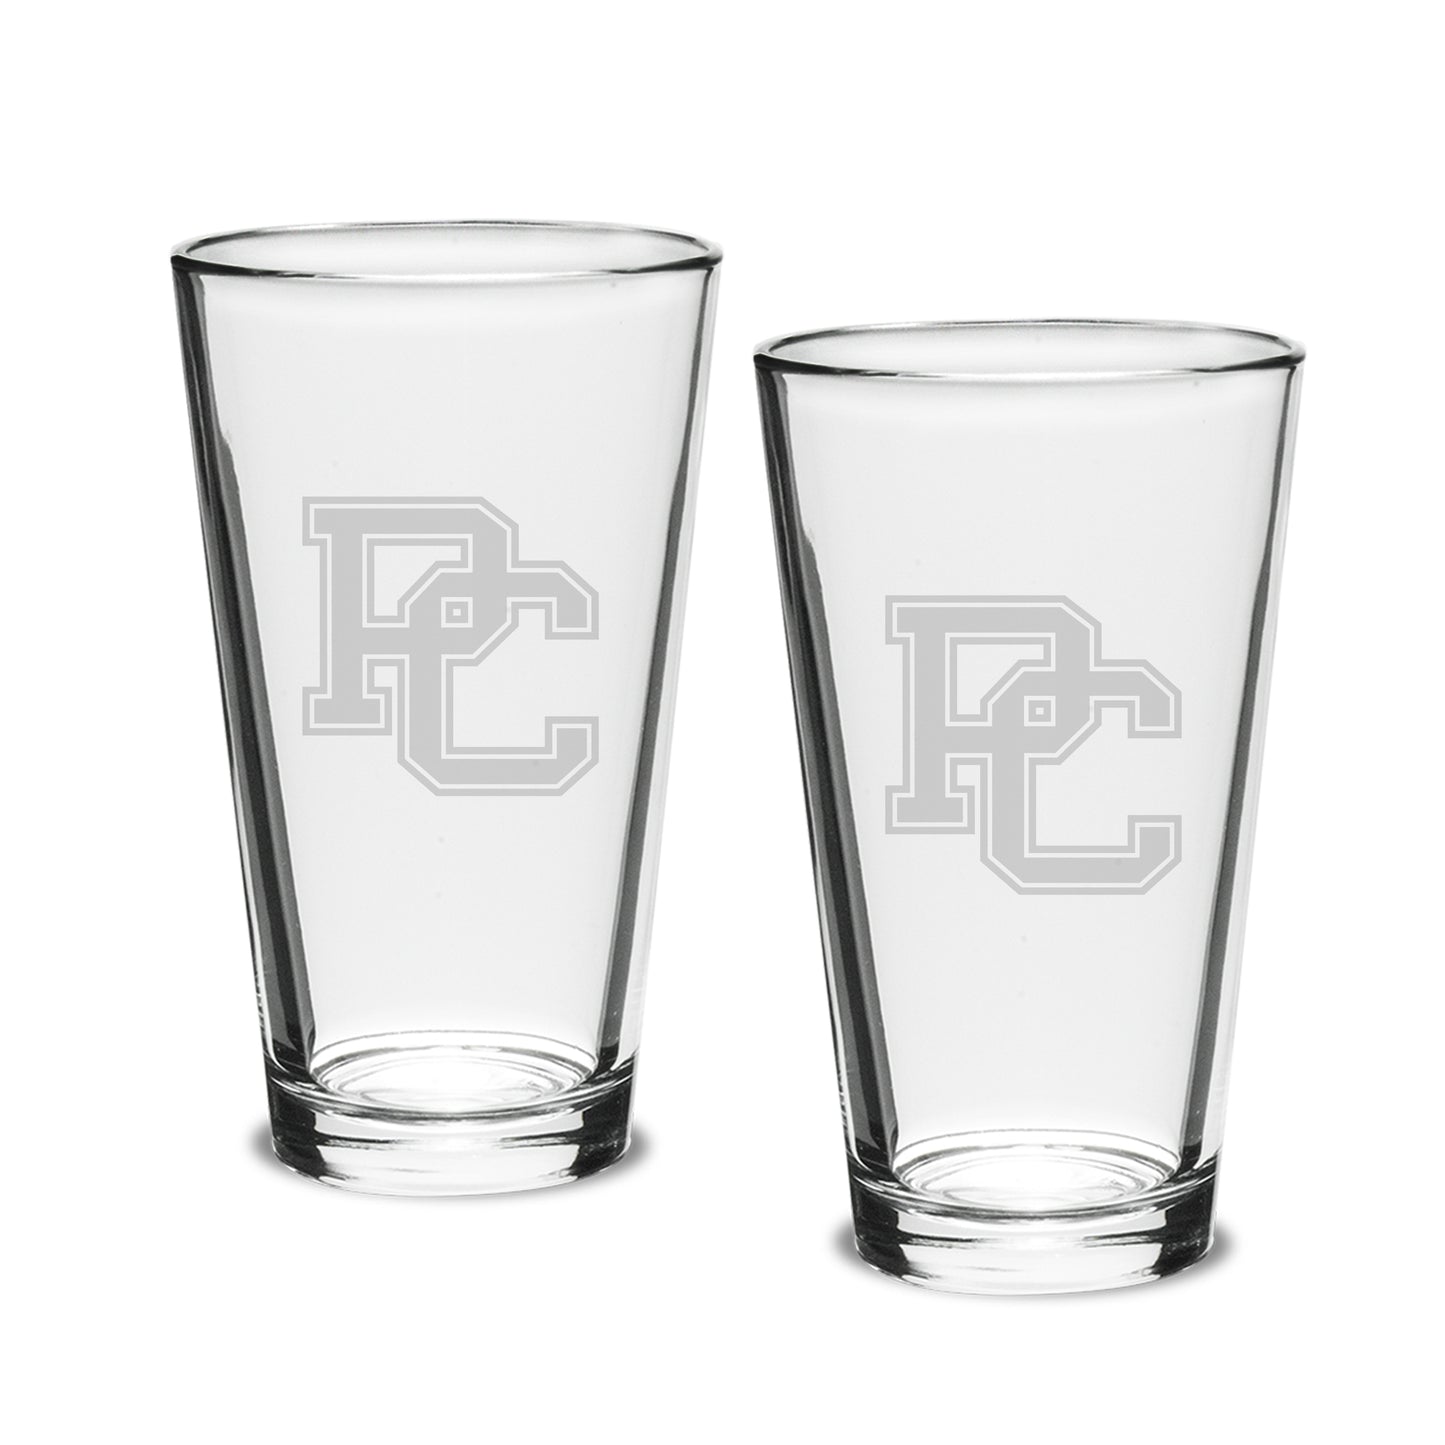 PC Campus Crystal Pub Glass 2 pack